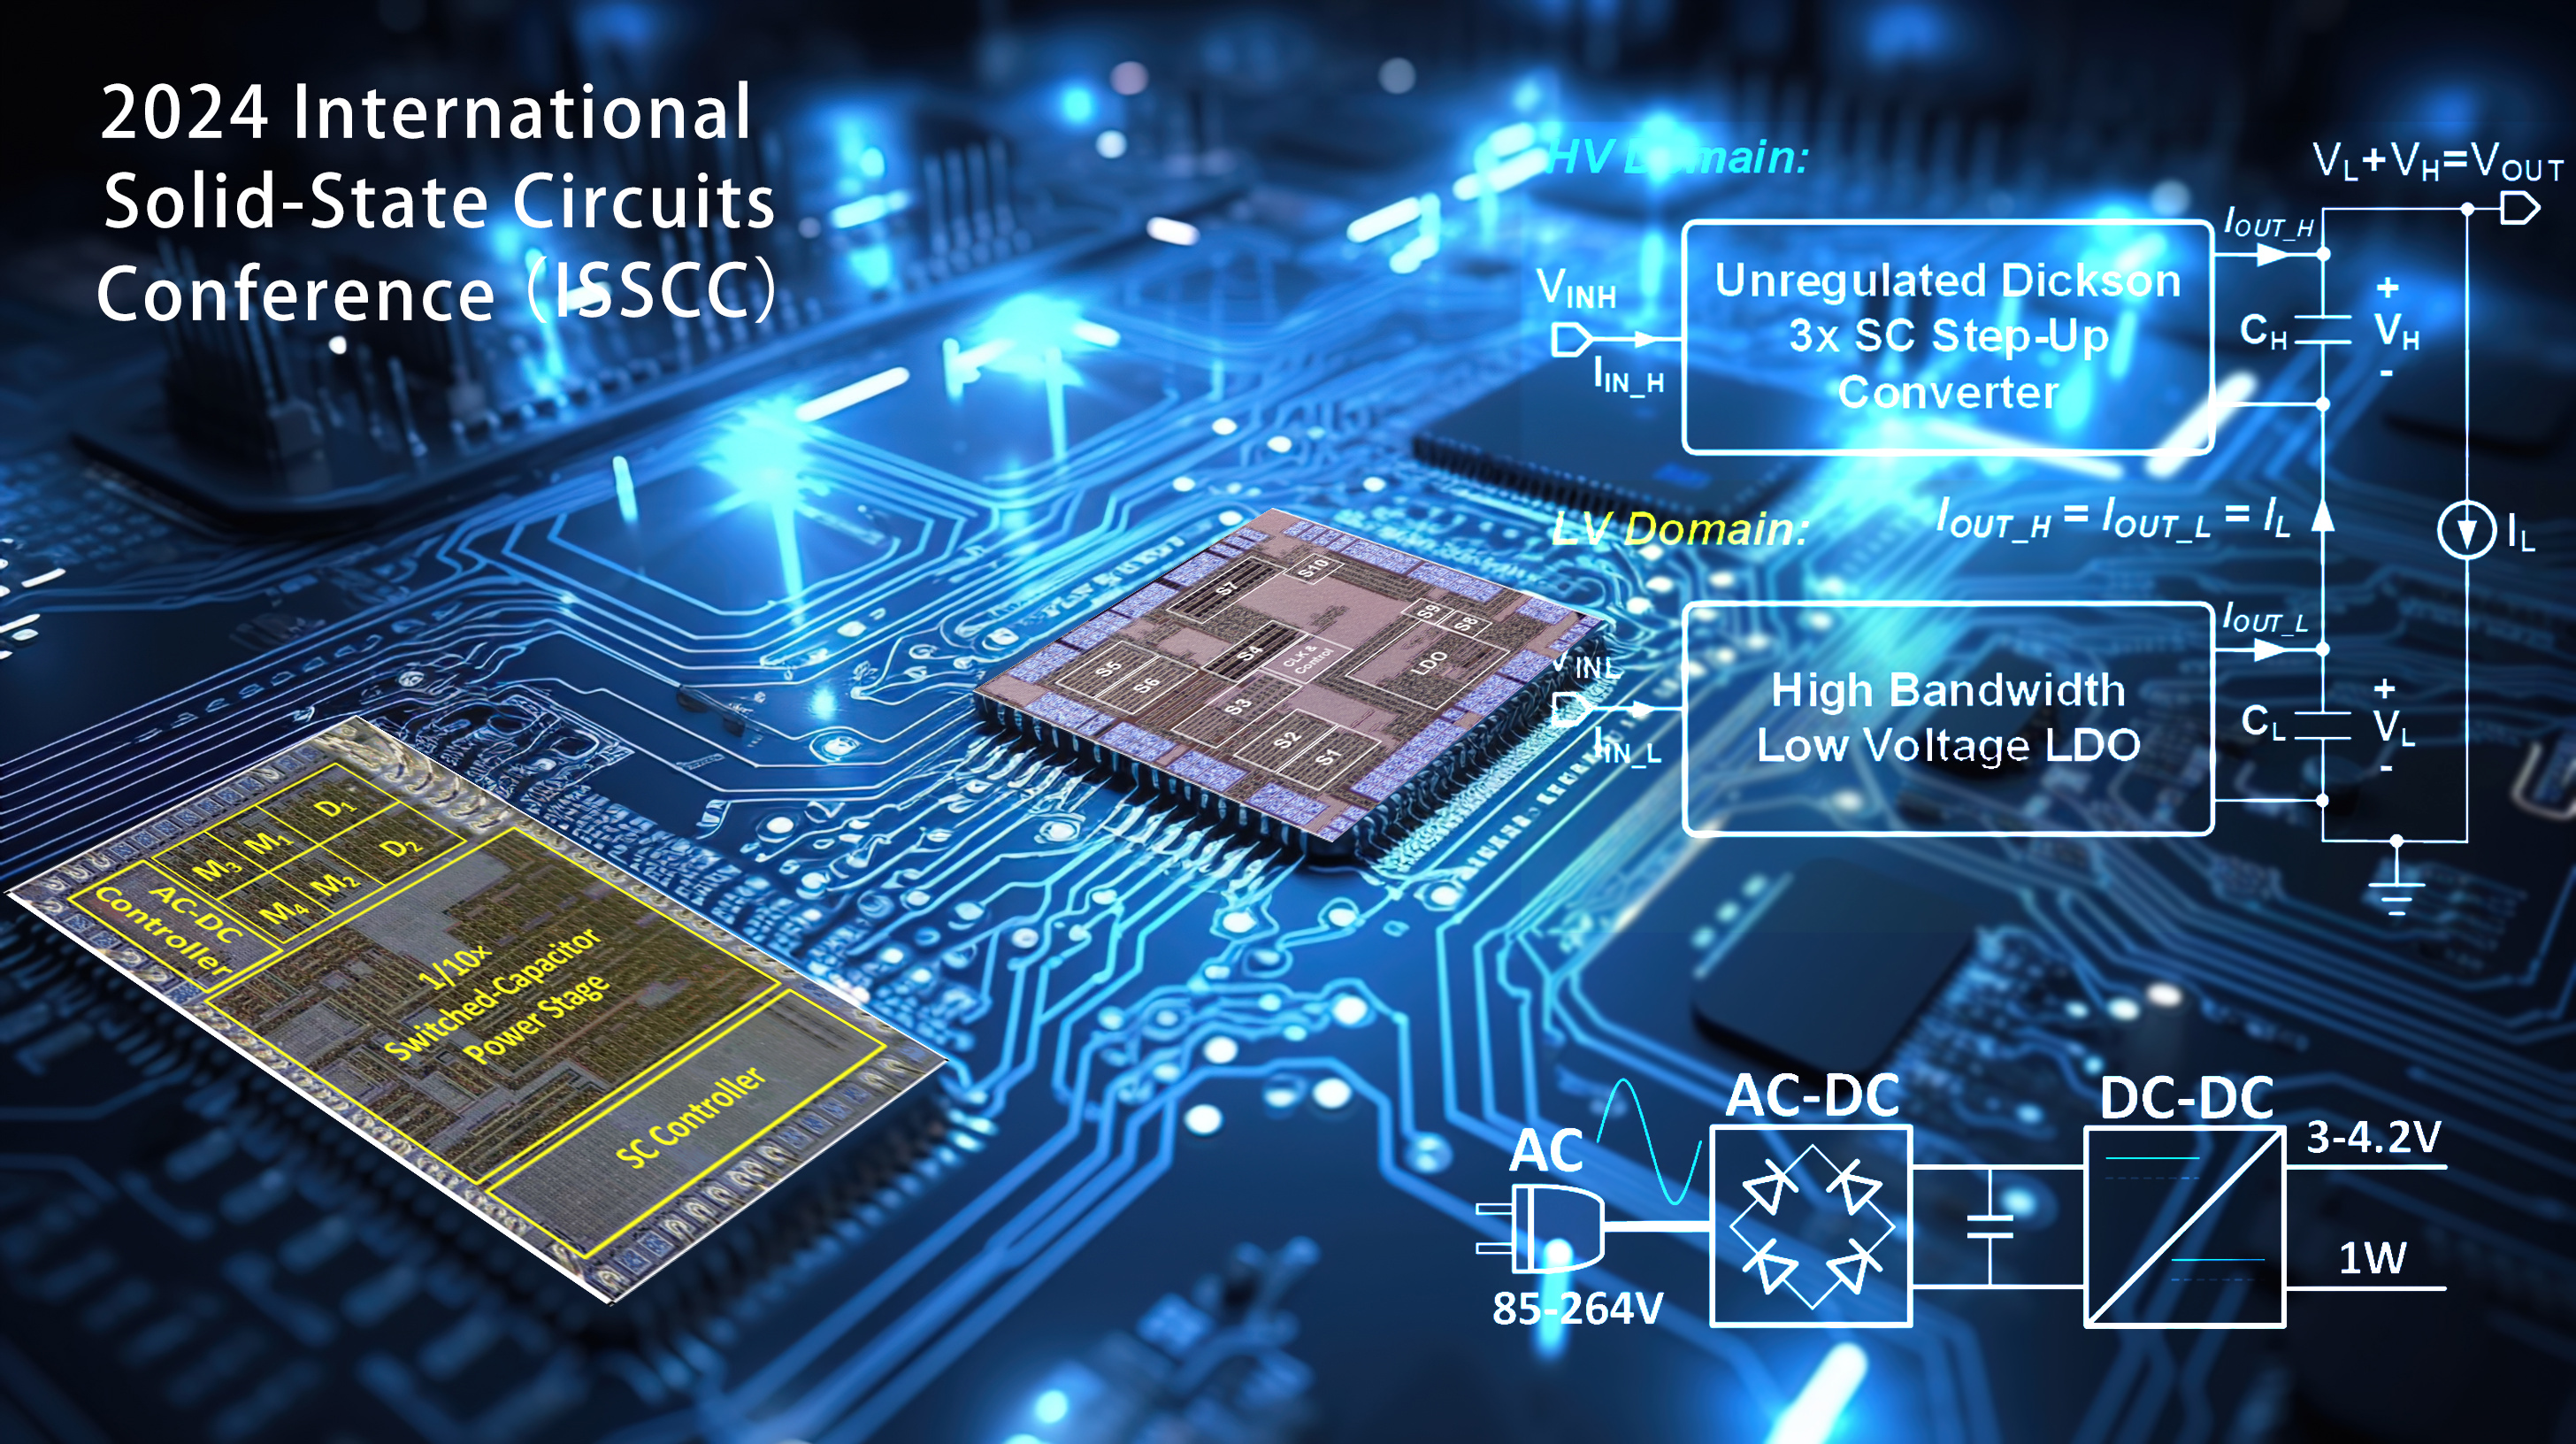 Researchers present two works on integrated circuit design at ISSCC 2024